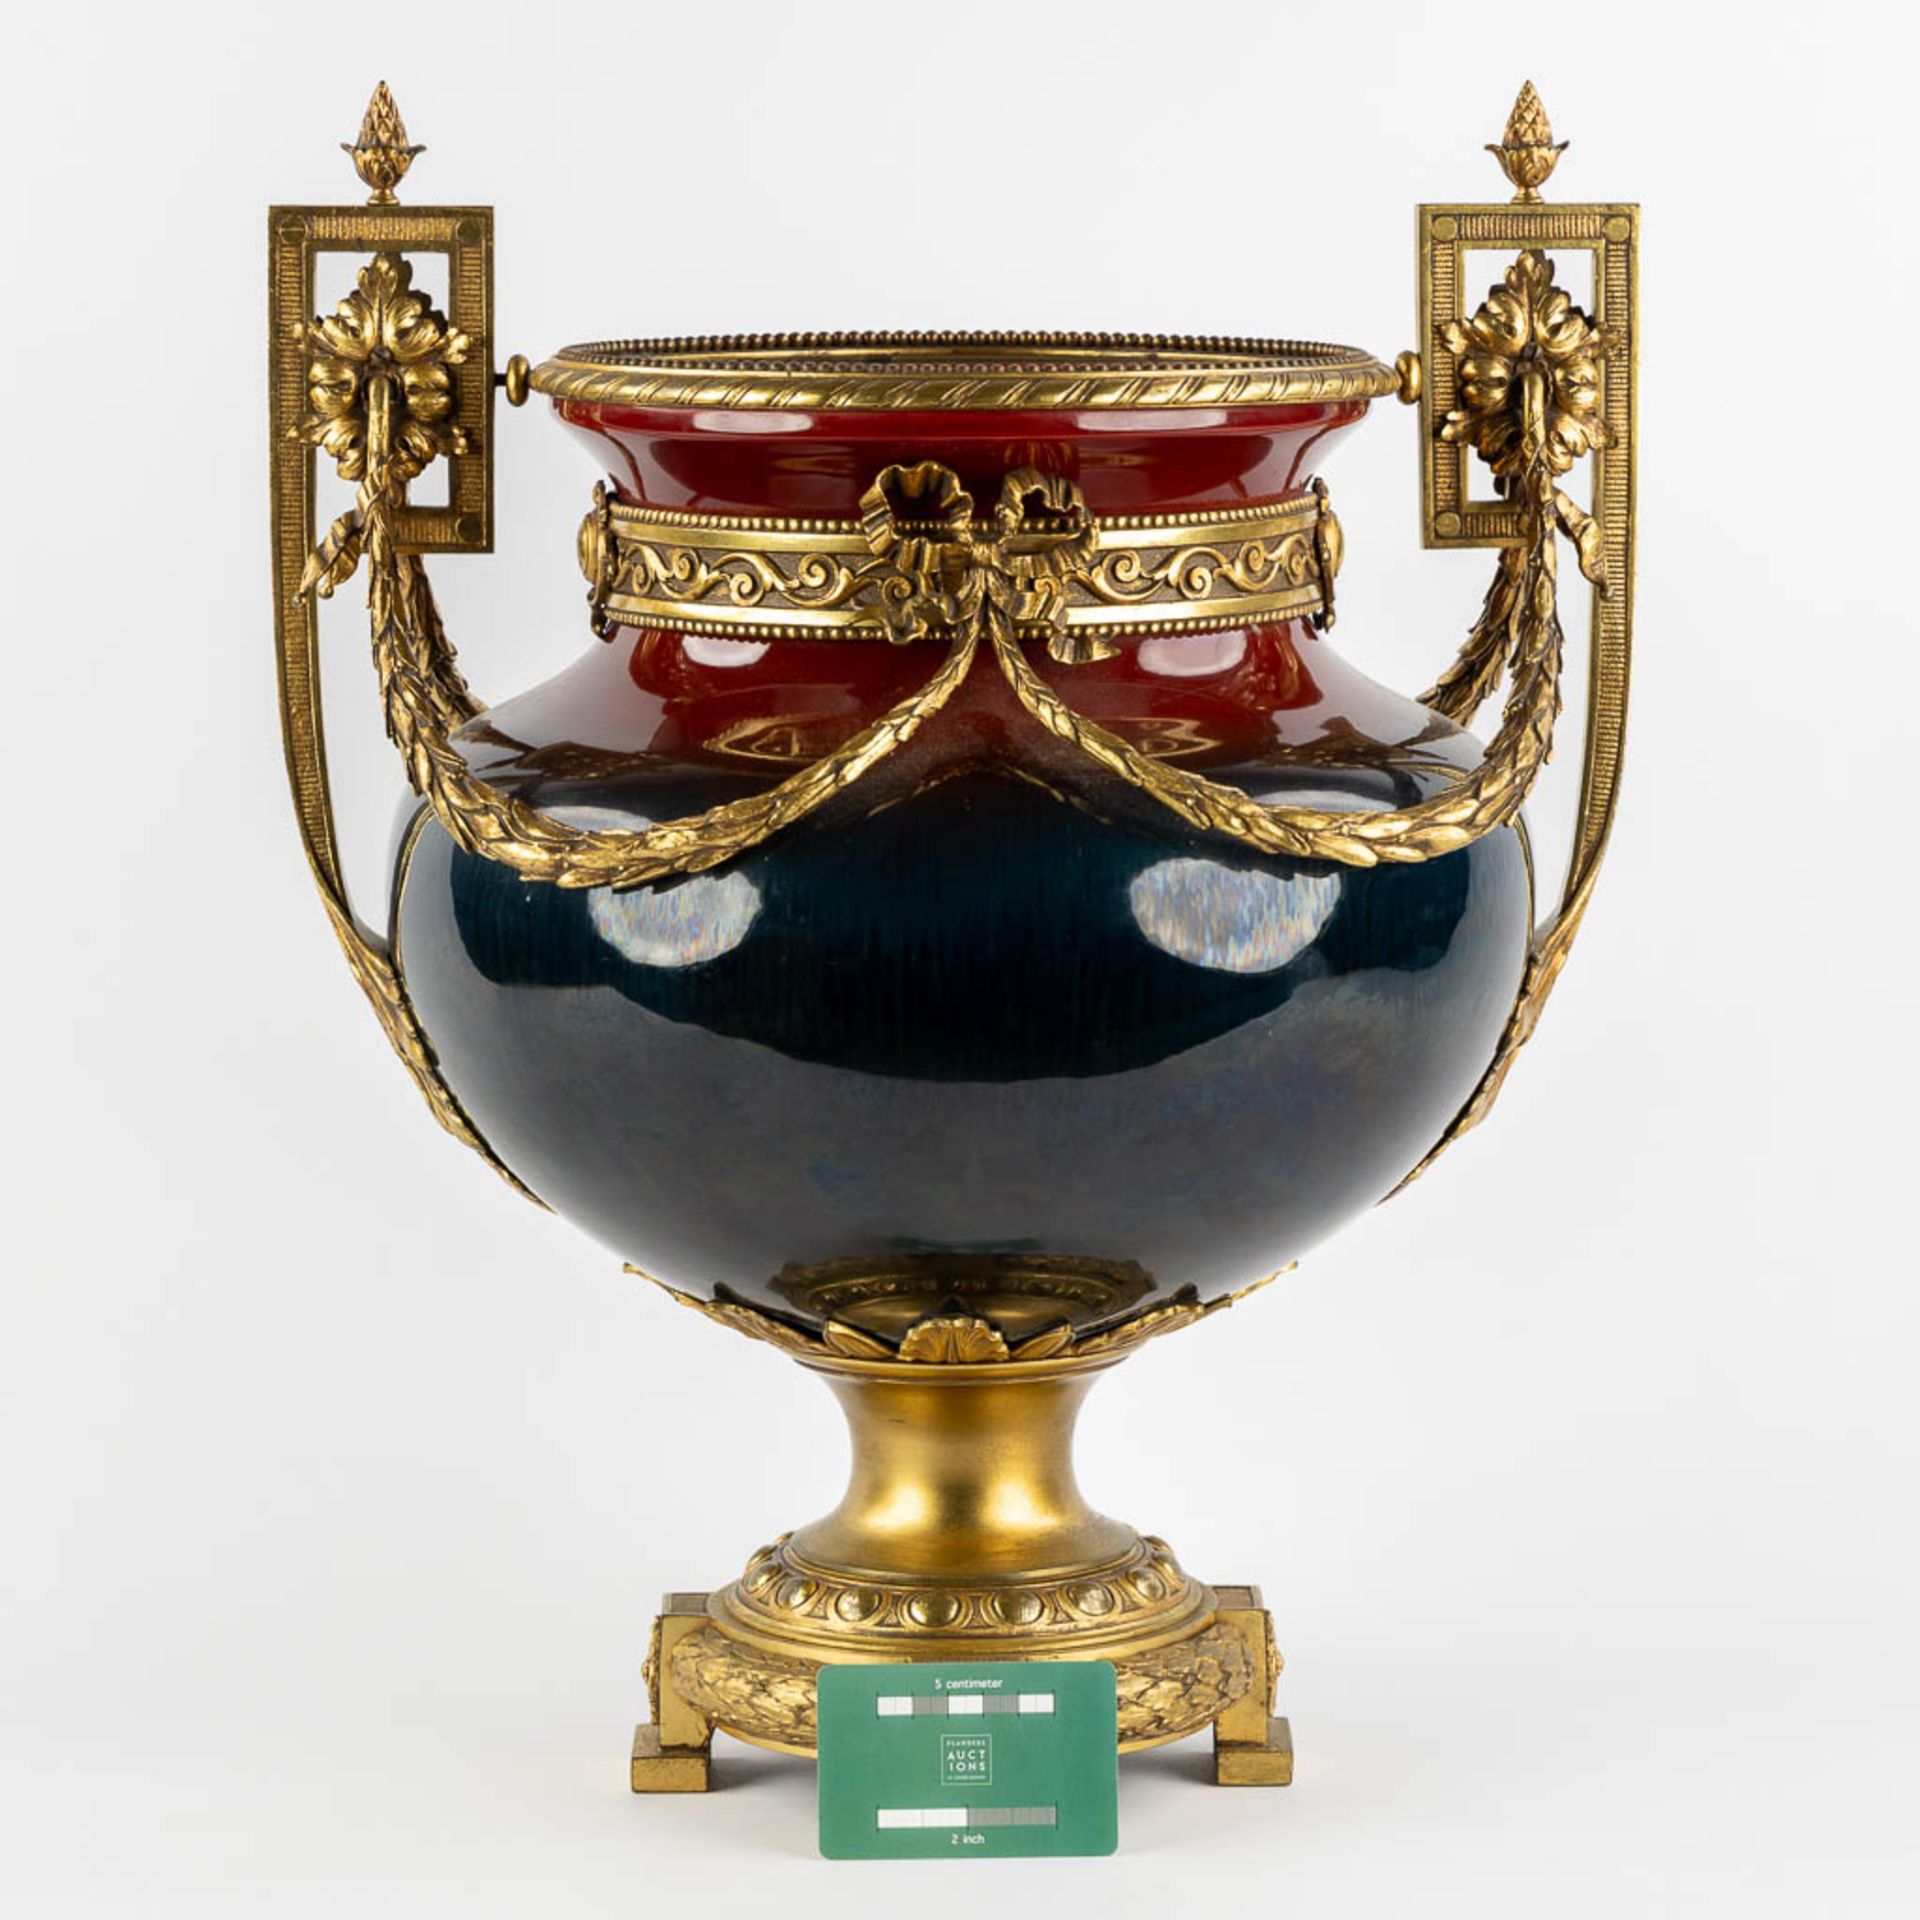 A large faience vase mounted with gilt bronze in Louis XV style. Circa 1900. (L:34 x W:40 x H:50 cm) - Image 2 of 12